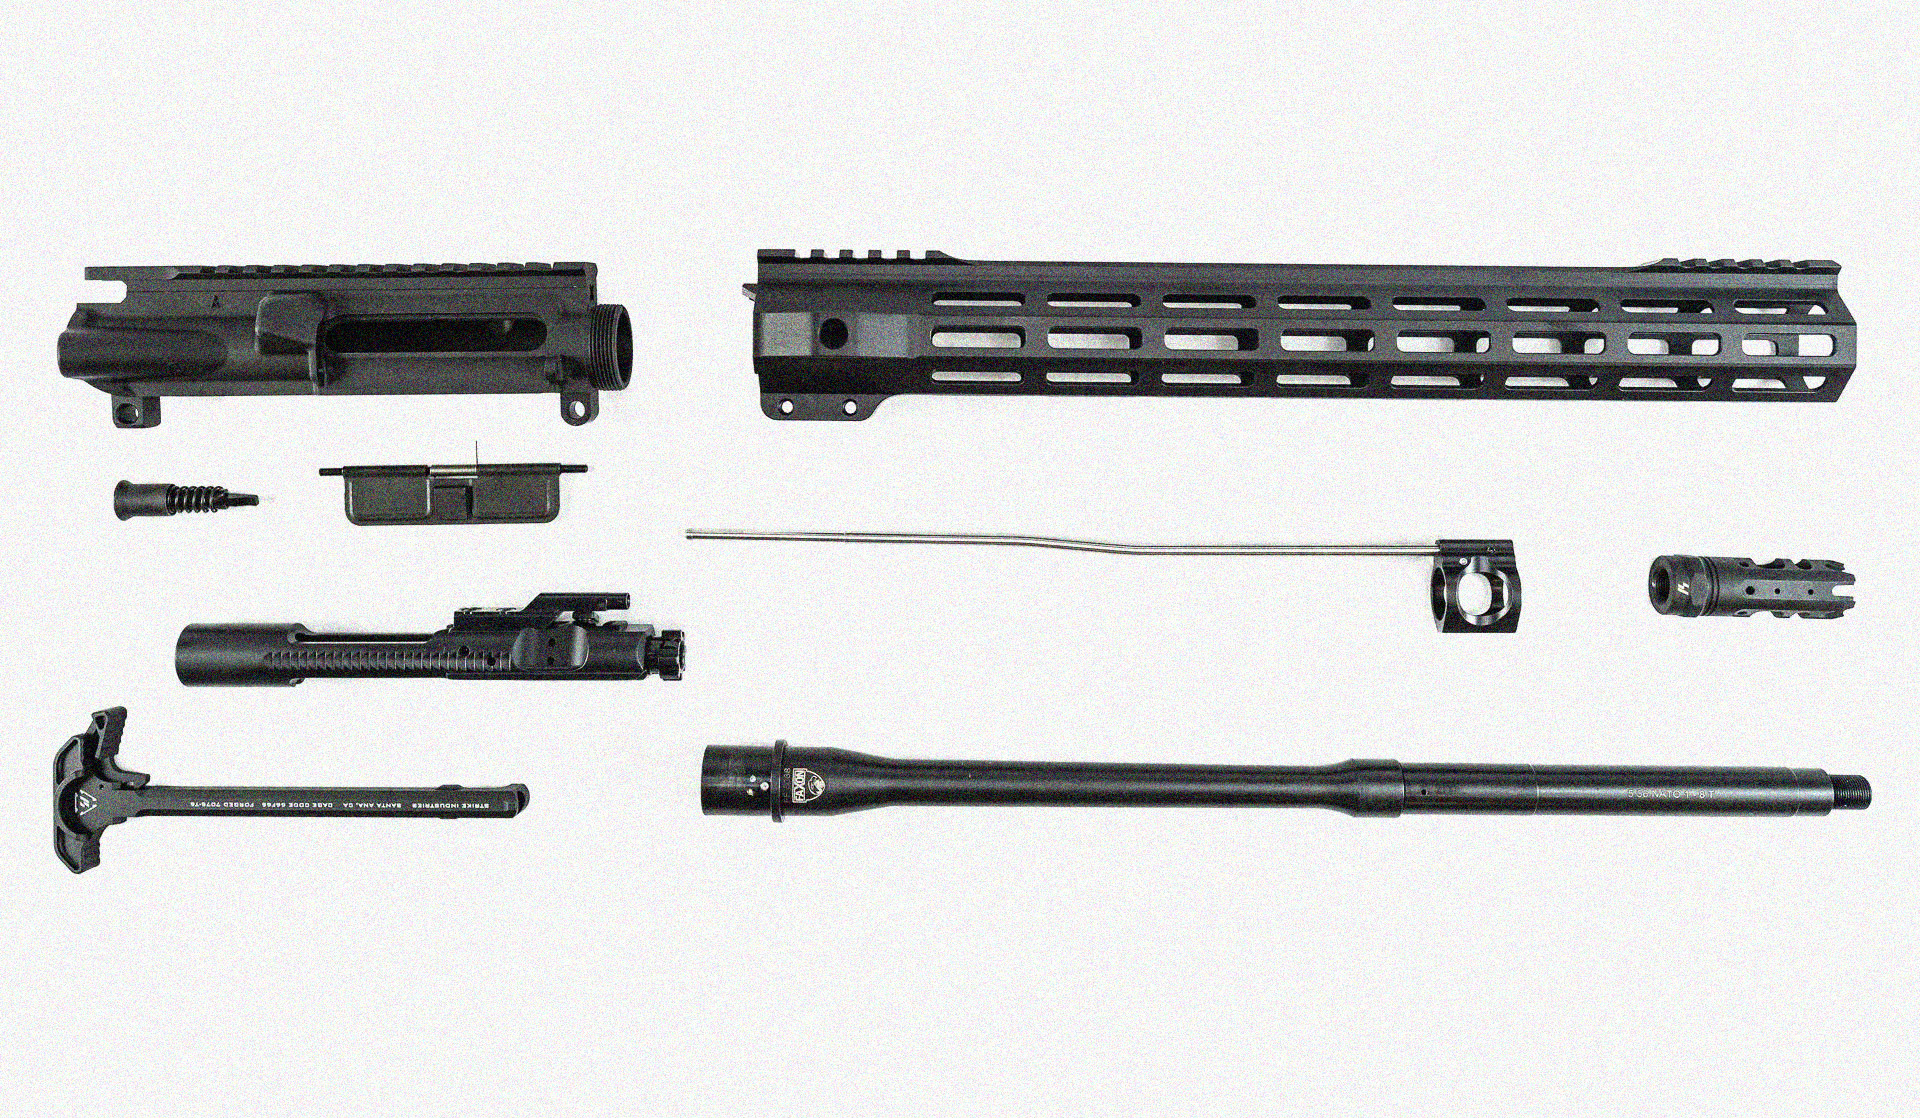 How to assemble AR upper?